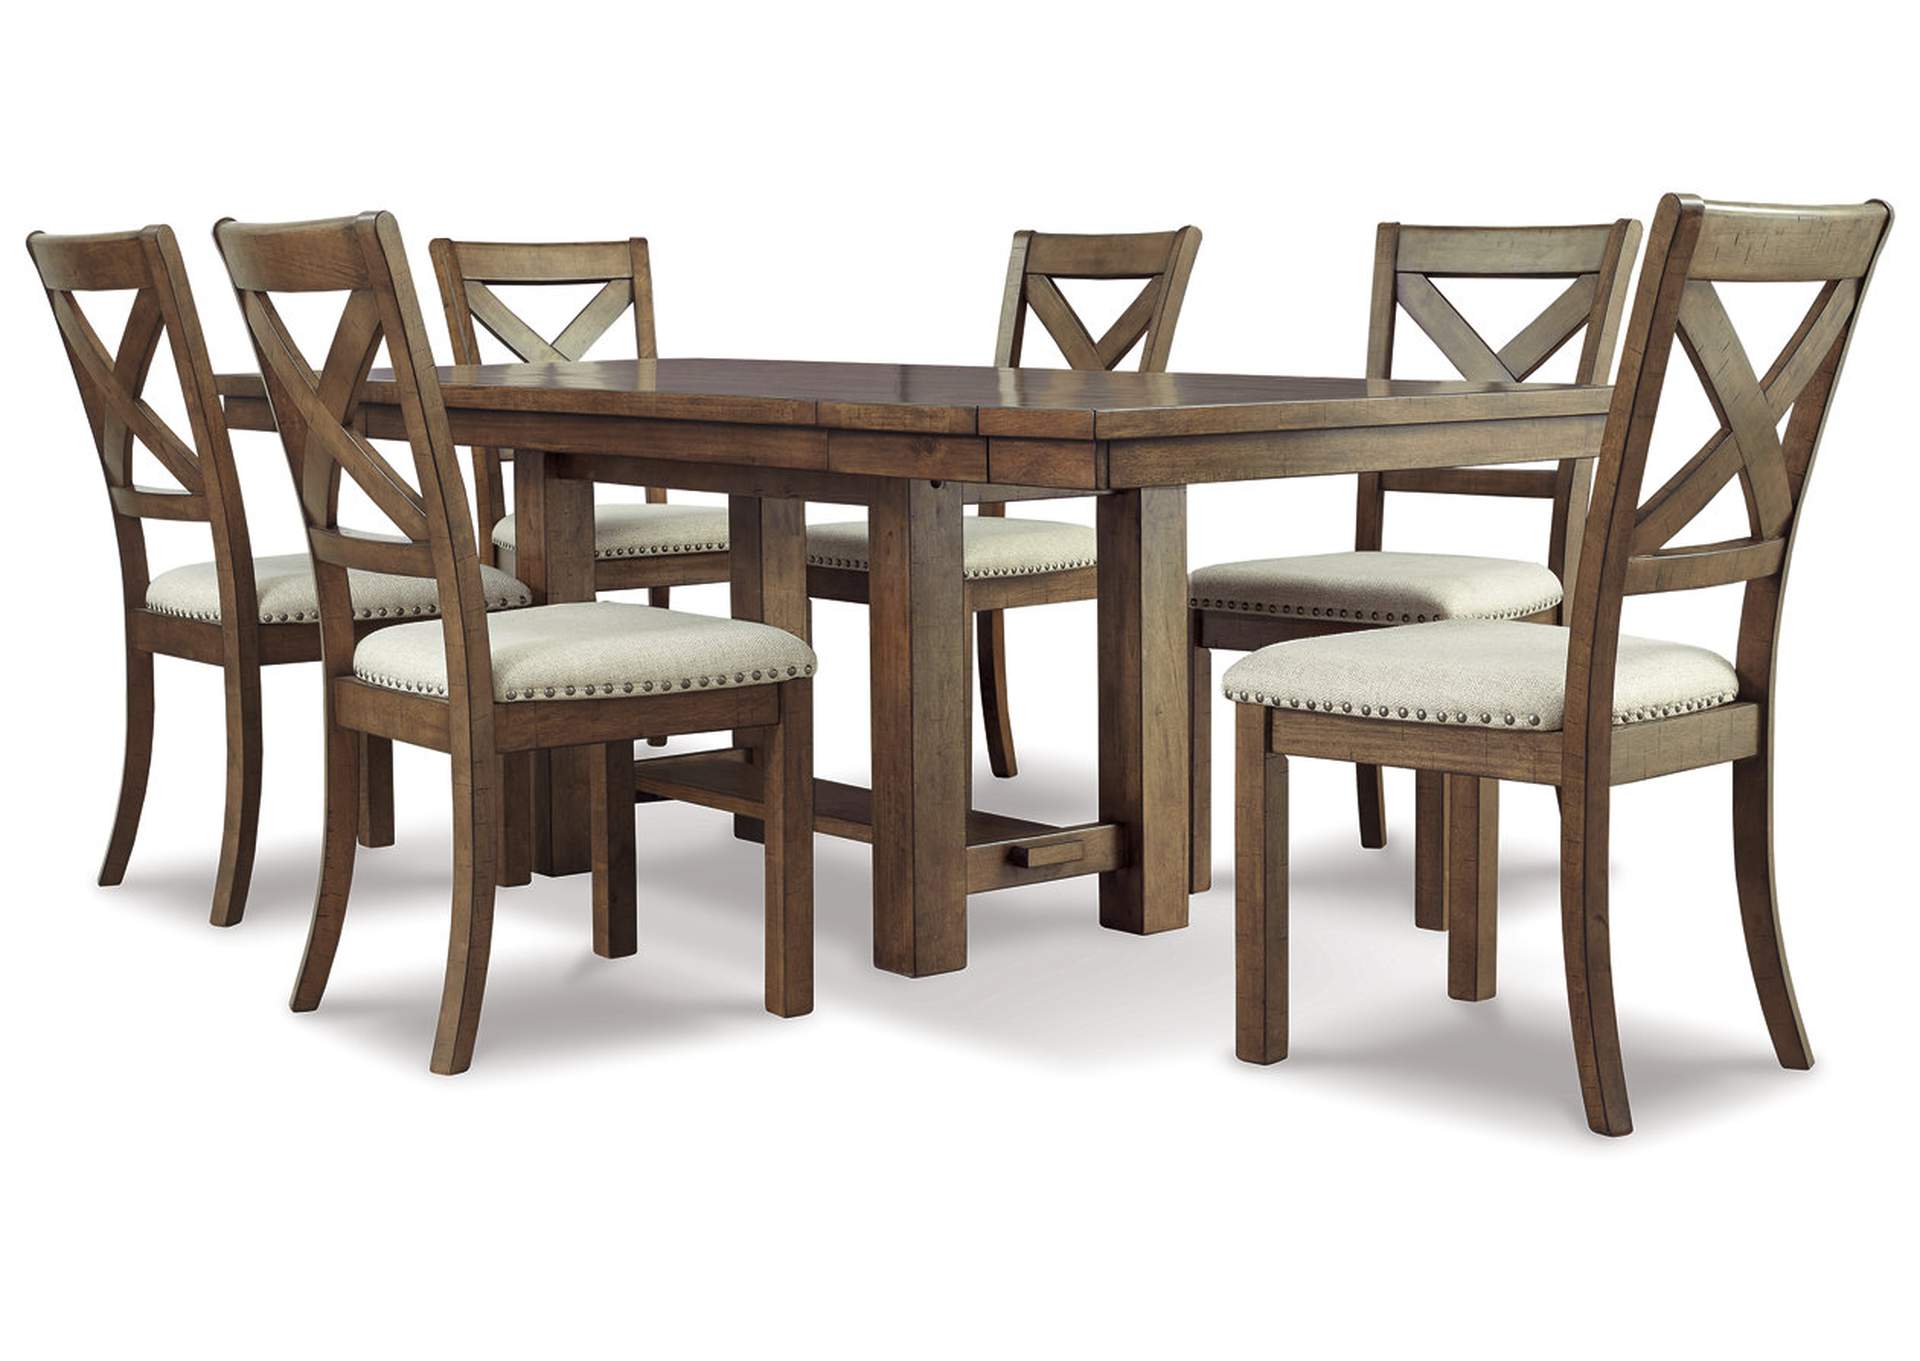 Moriville Dining Table and 6 Chairs,Signature Design By Ashley